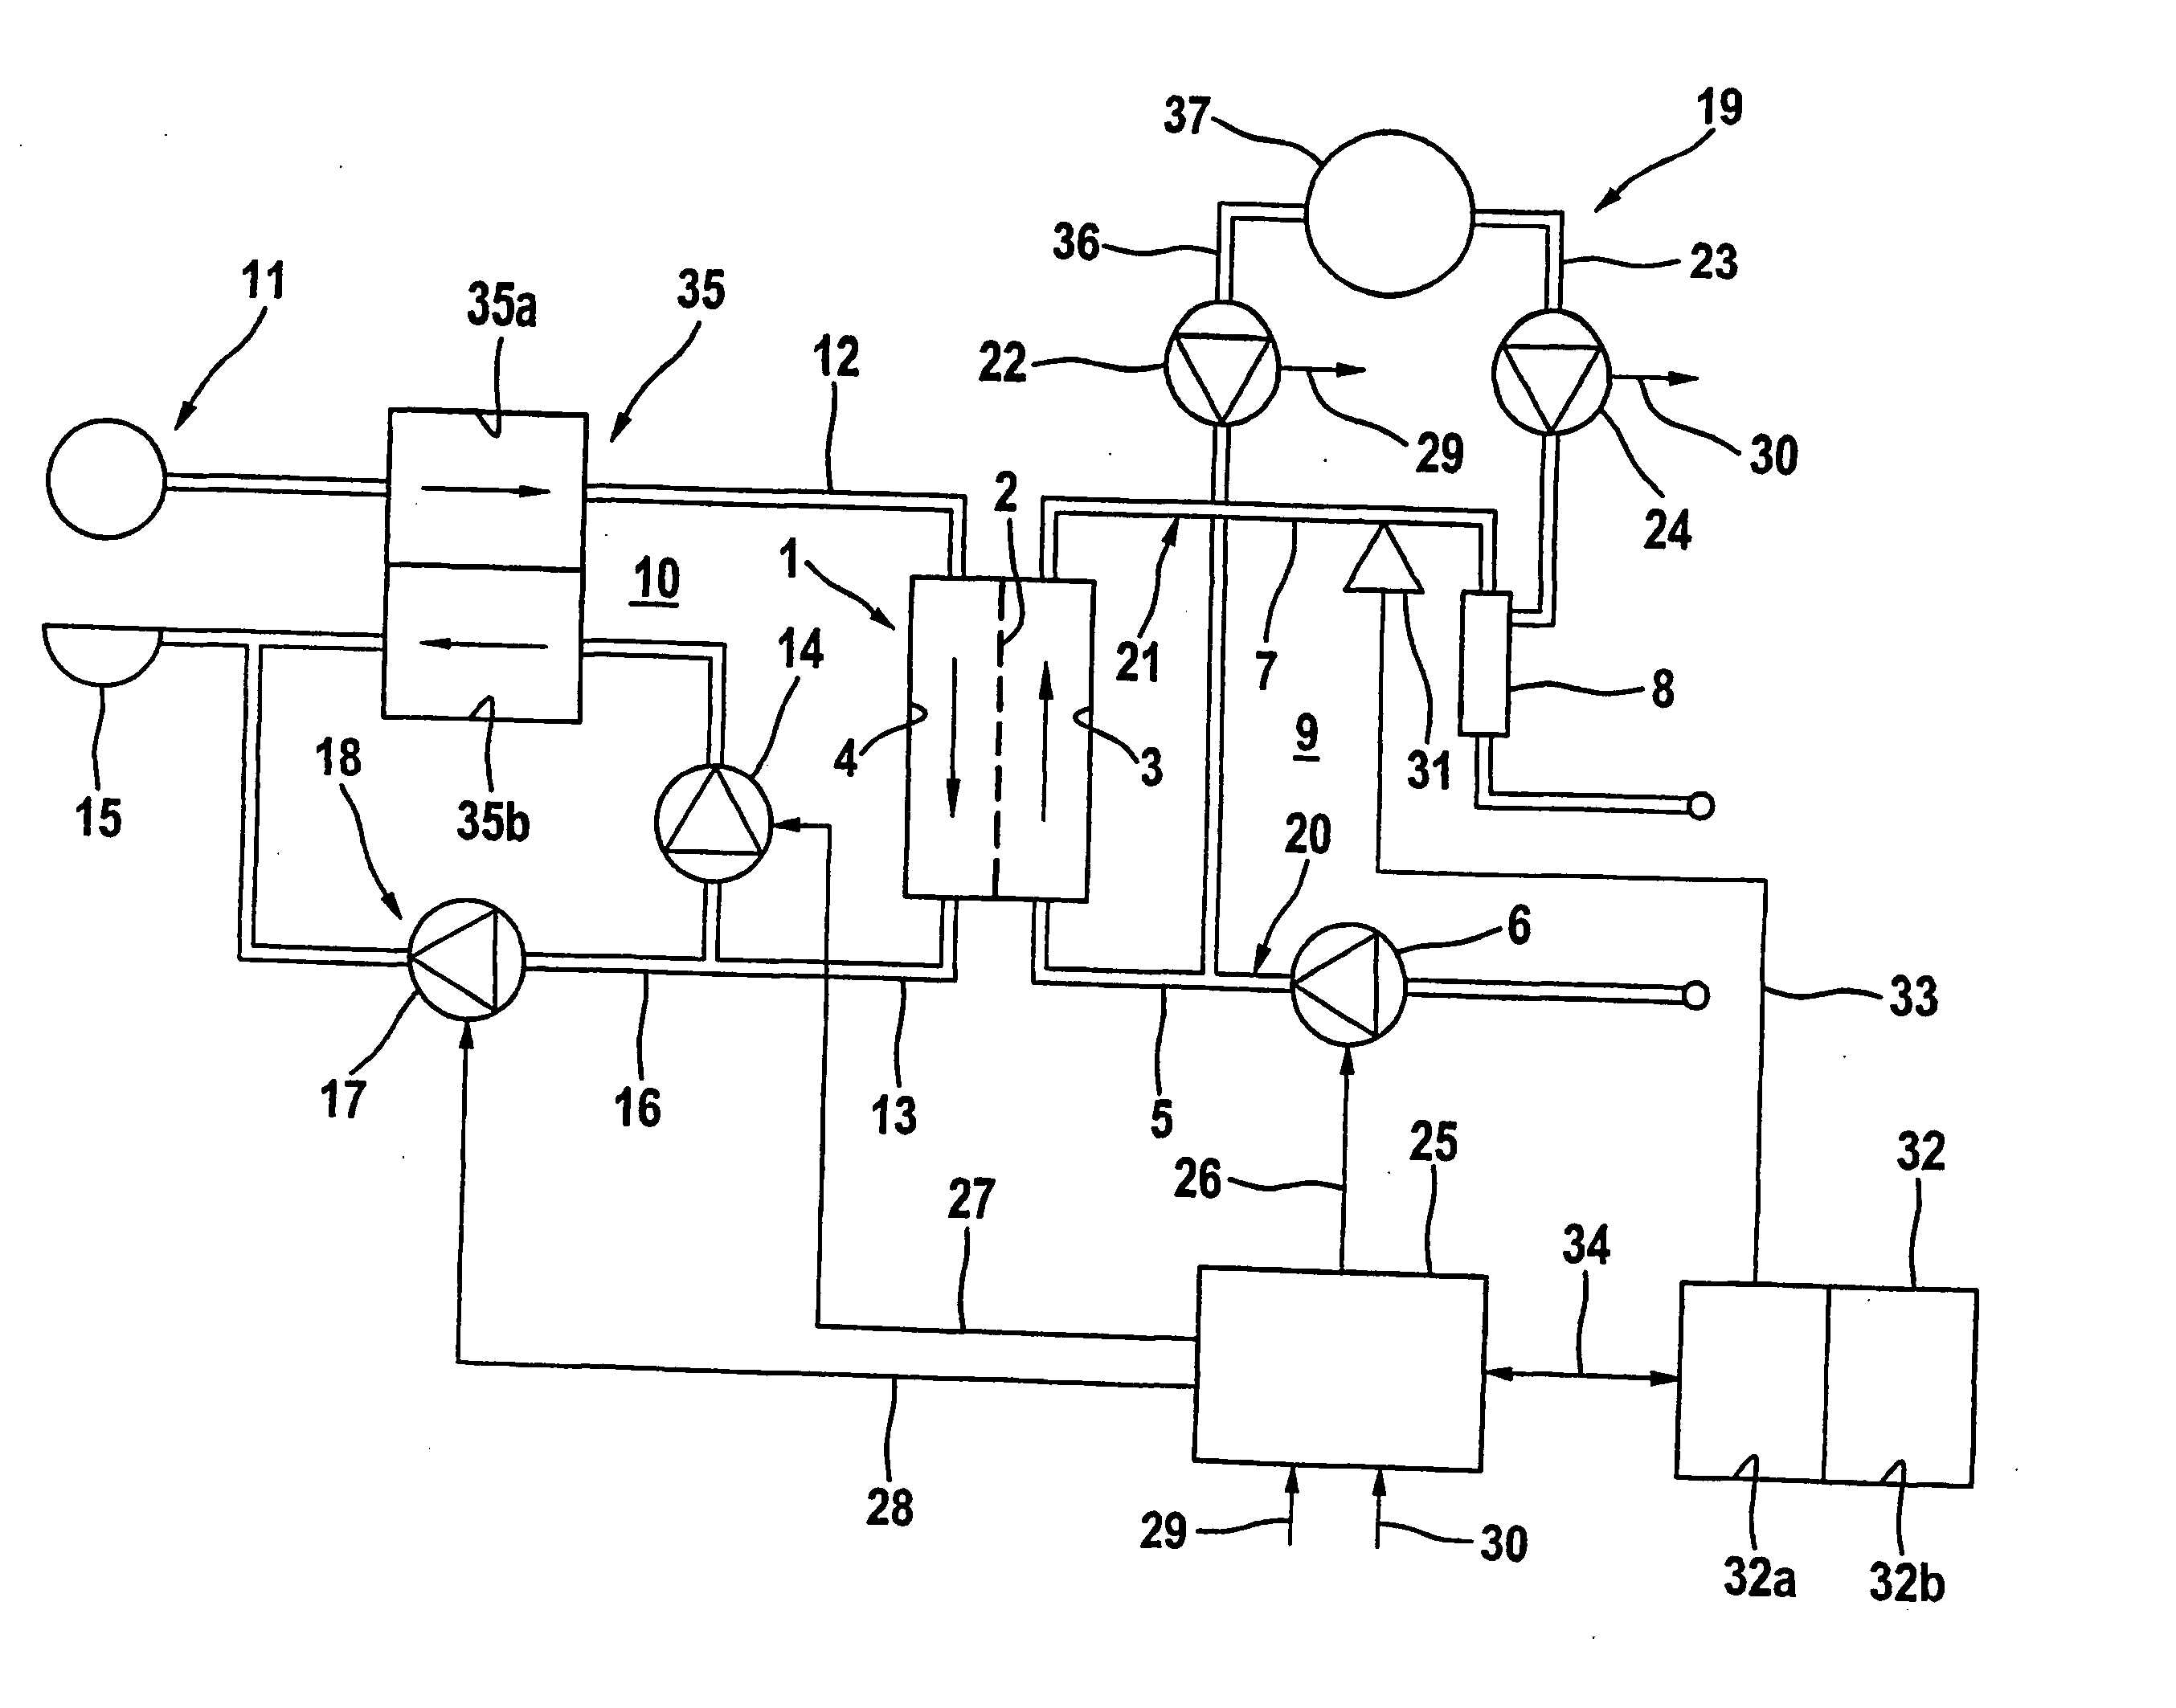 Method and device for the detection of disruptions of the blood flow in an extracorporeal blood circuit